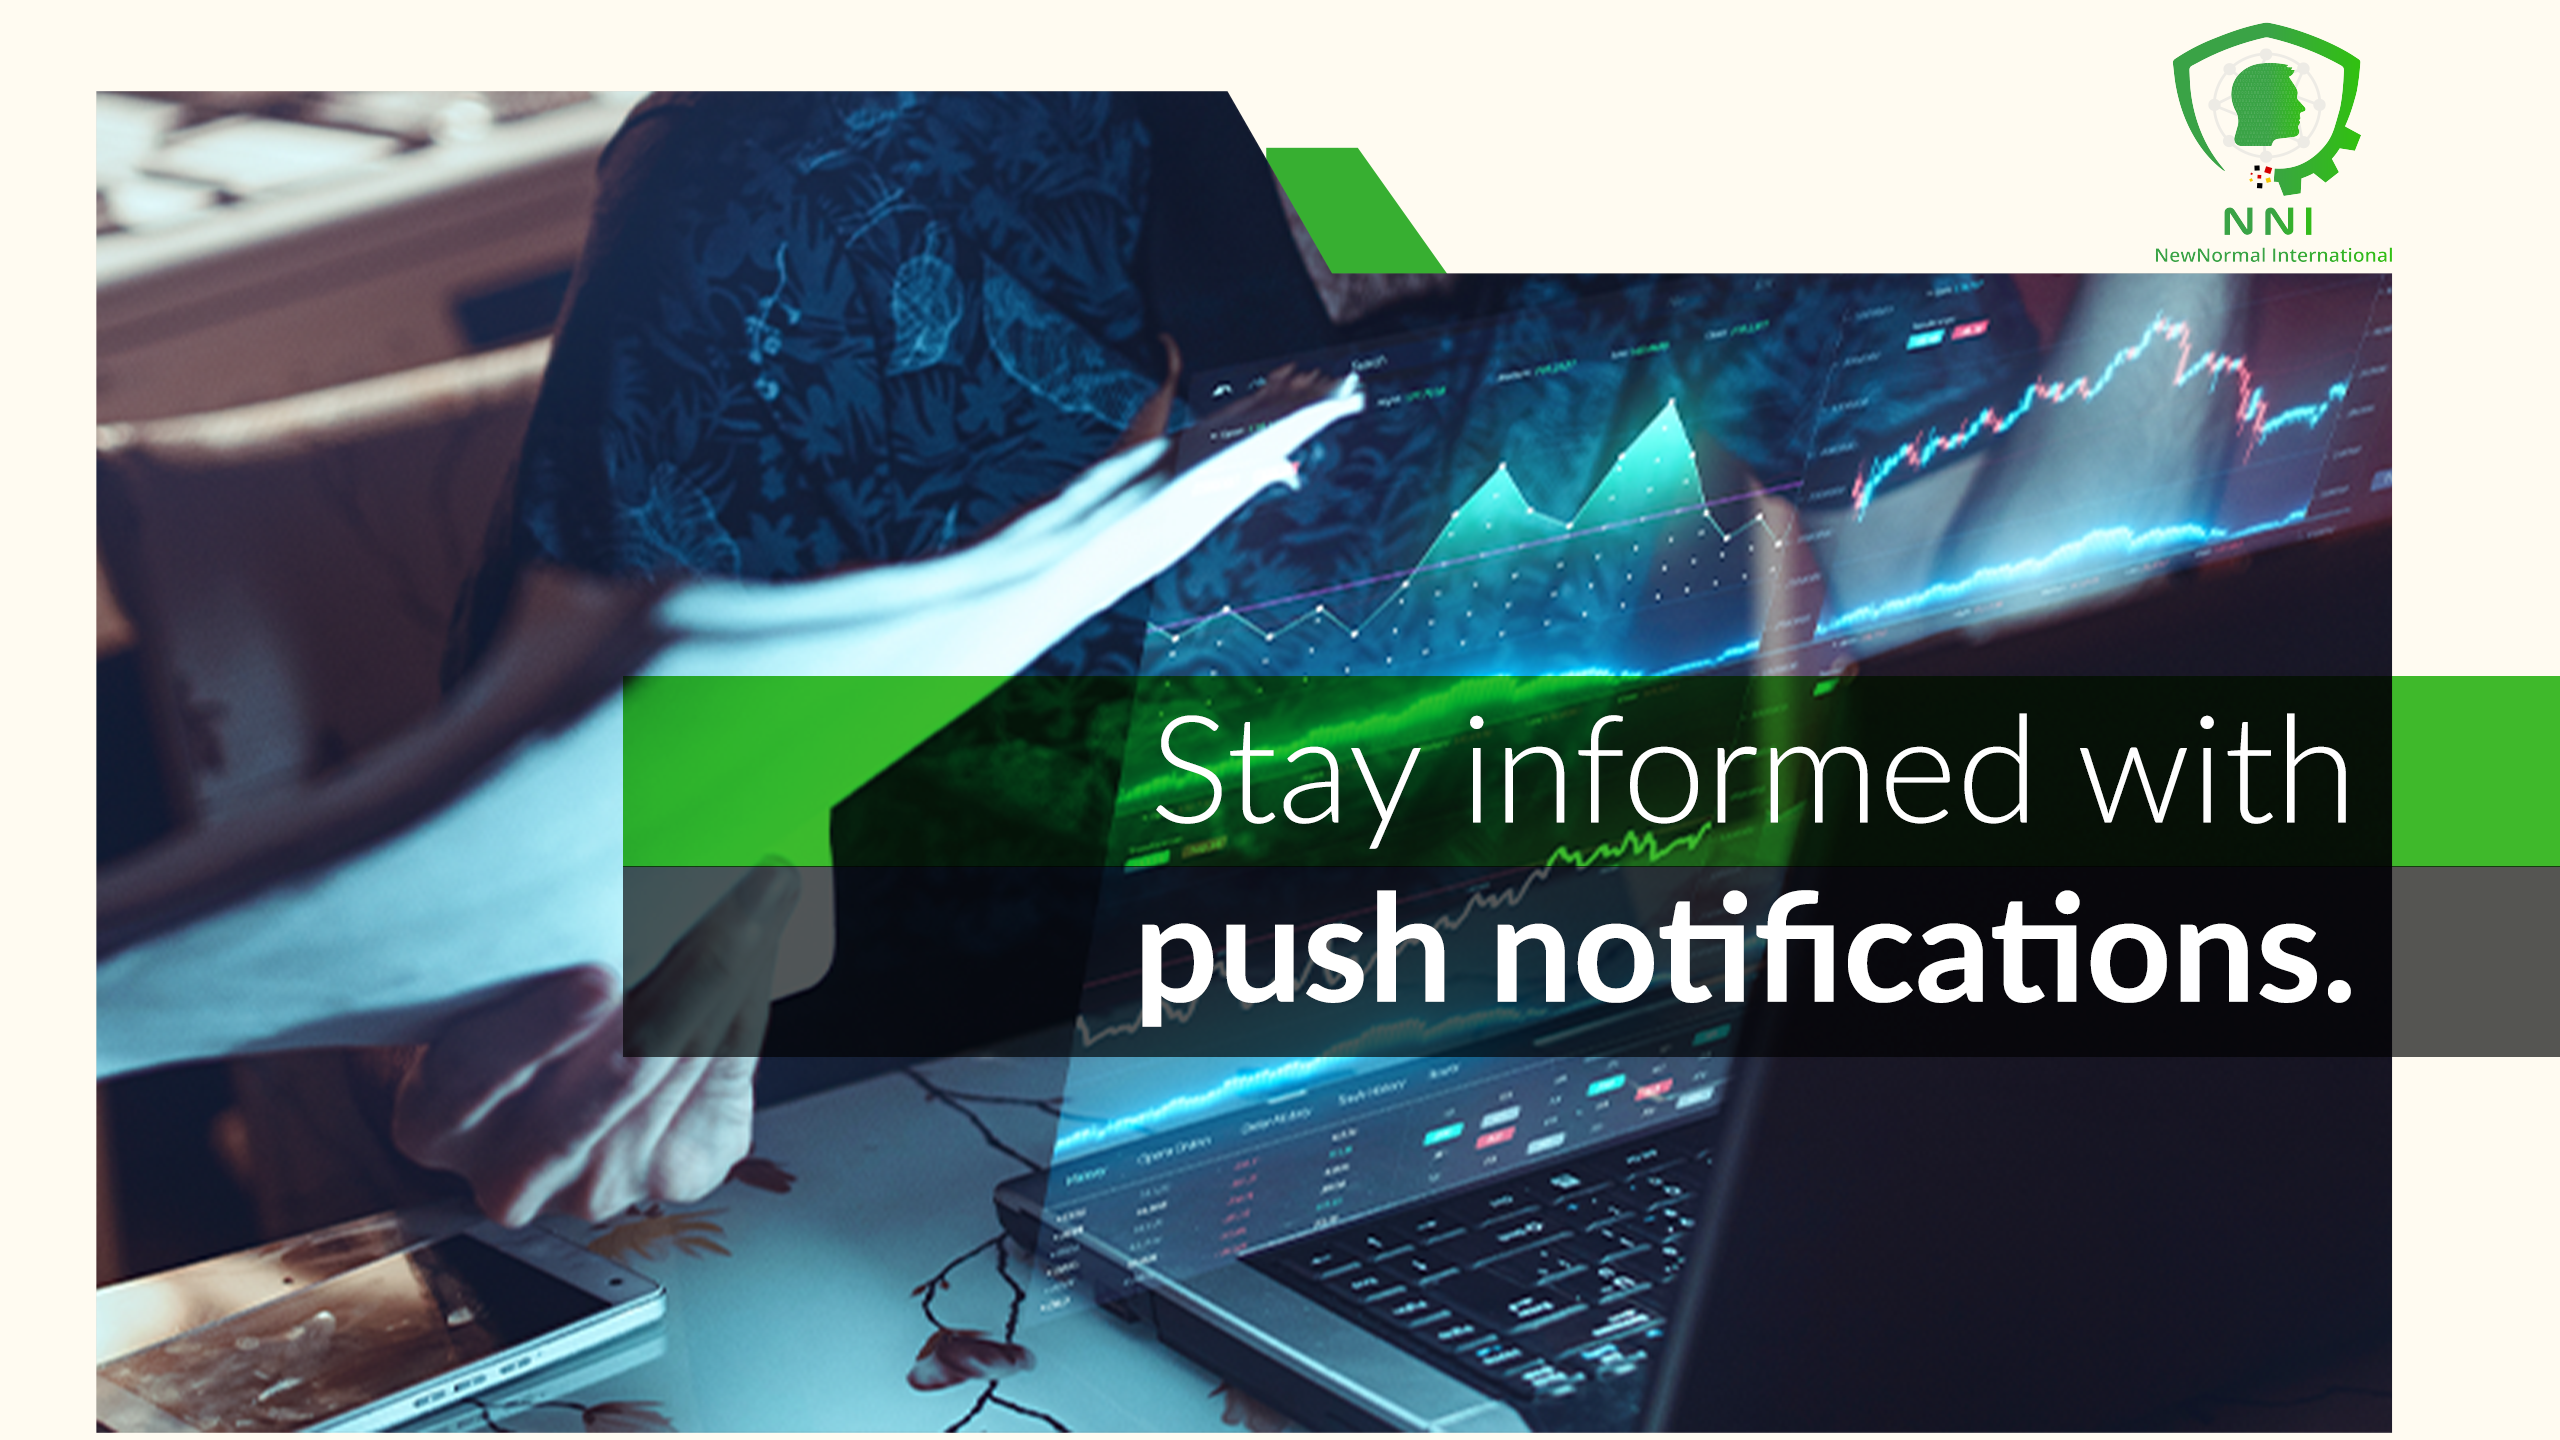 Stay informed with push notifications